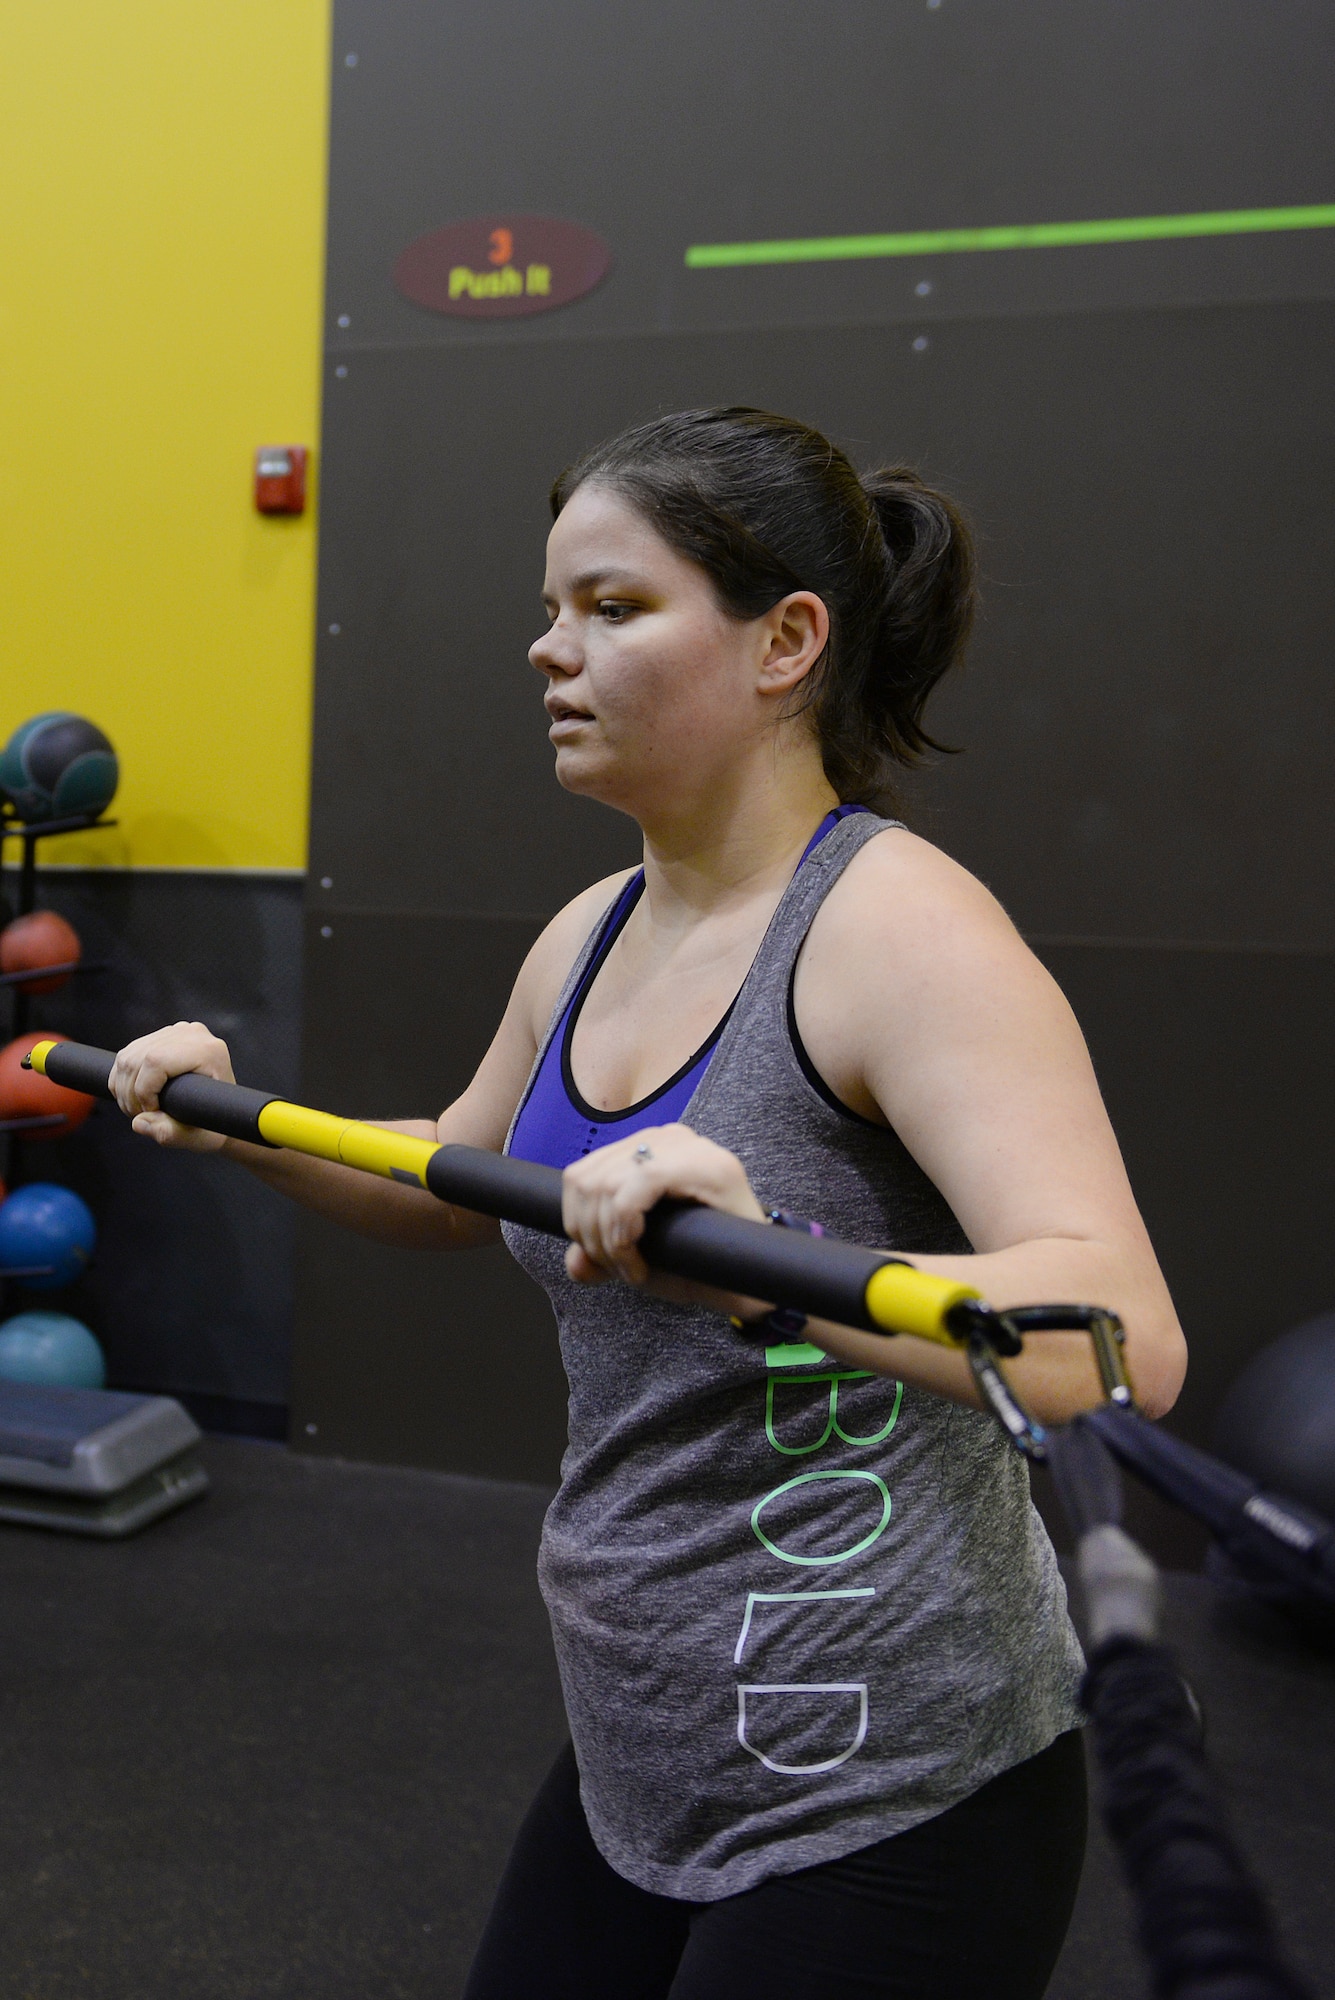 Jessi McNulty, 26, performs a tension exercise at her gym, O’Fallon, Ill., Jan. 22, 2015. This Air Force spouse has been hitting this gym for nearly two years, during which time she has lost 90 pounds despite having temporal lobe epilepsy. Generally her workouts are total-body-oriented and her and her personal trainer monitors her heart rate to mitigate her seizures, which are exercise-induced. (U.S. Air Force photo by Airman 1st Class Erica Crossen)